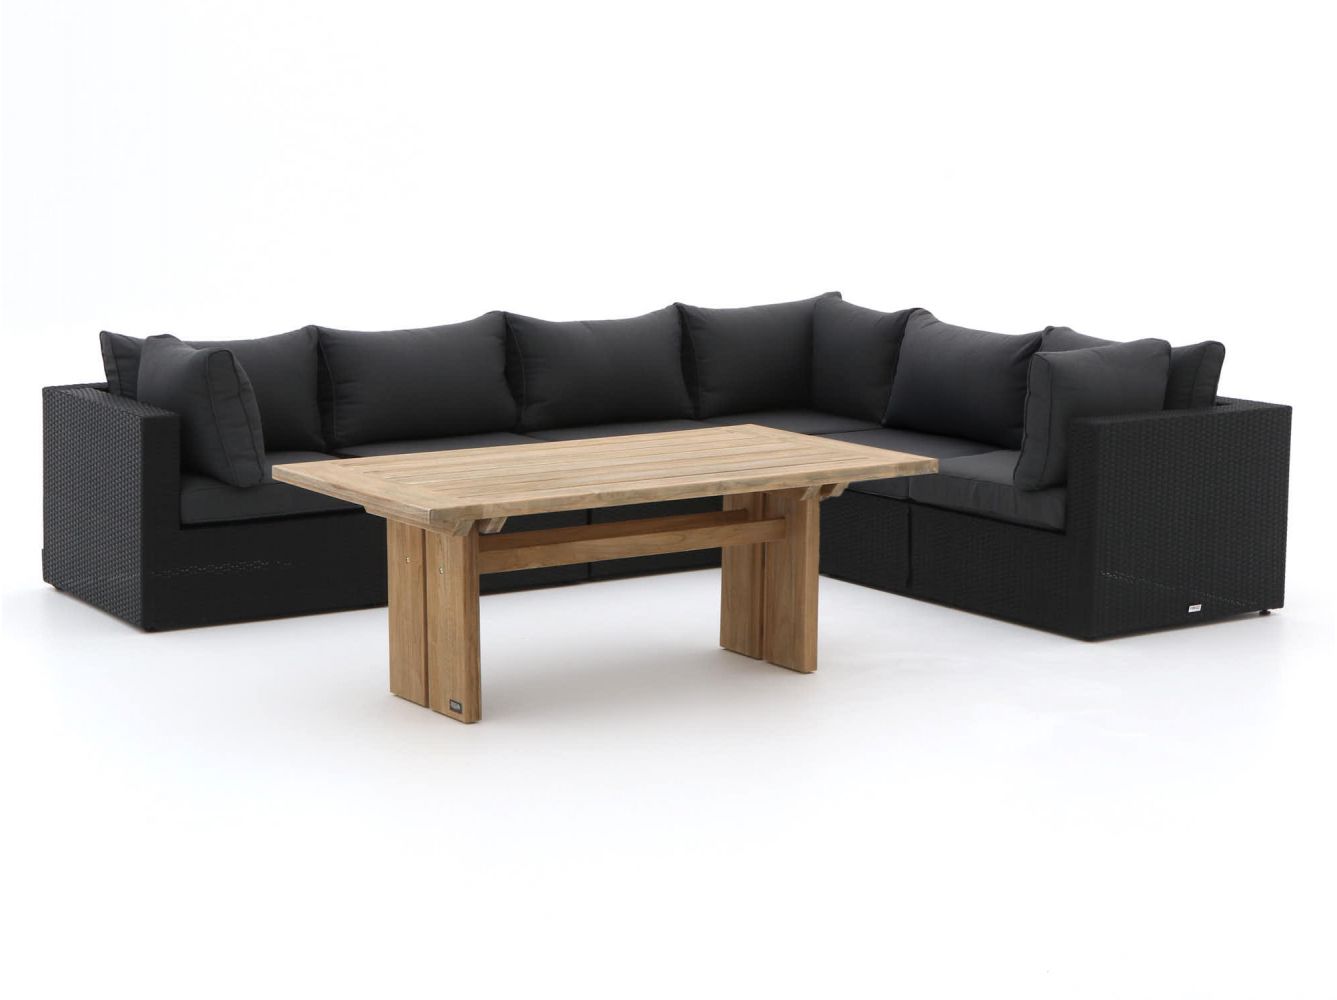 32ed5921cbd3b0c6577617db79de048b0db174b4 114642 p01 t4qdjhebn5xxcrhj - Forza Barolo/ROUGH-L dining loungeset 7-delig